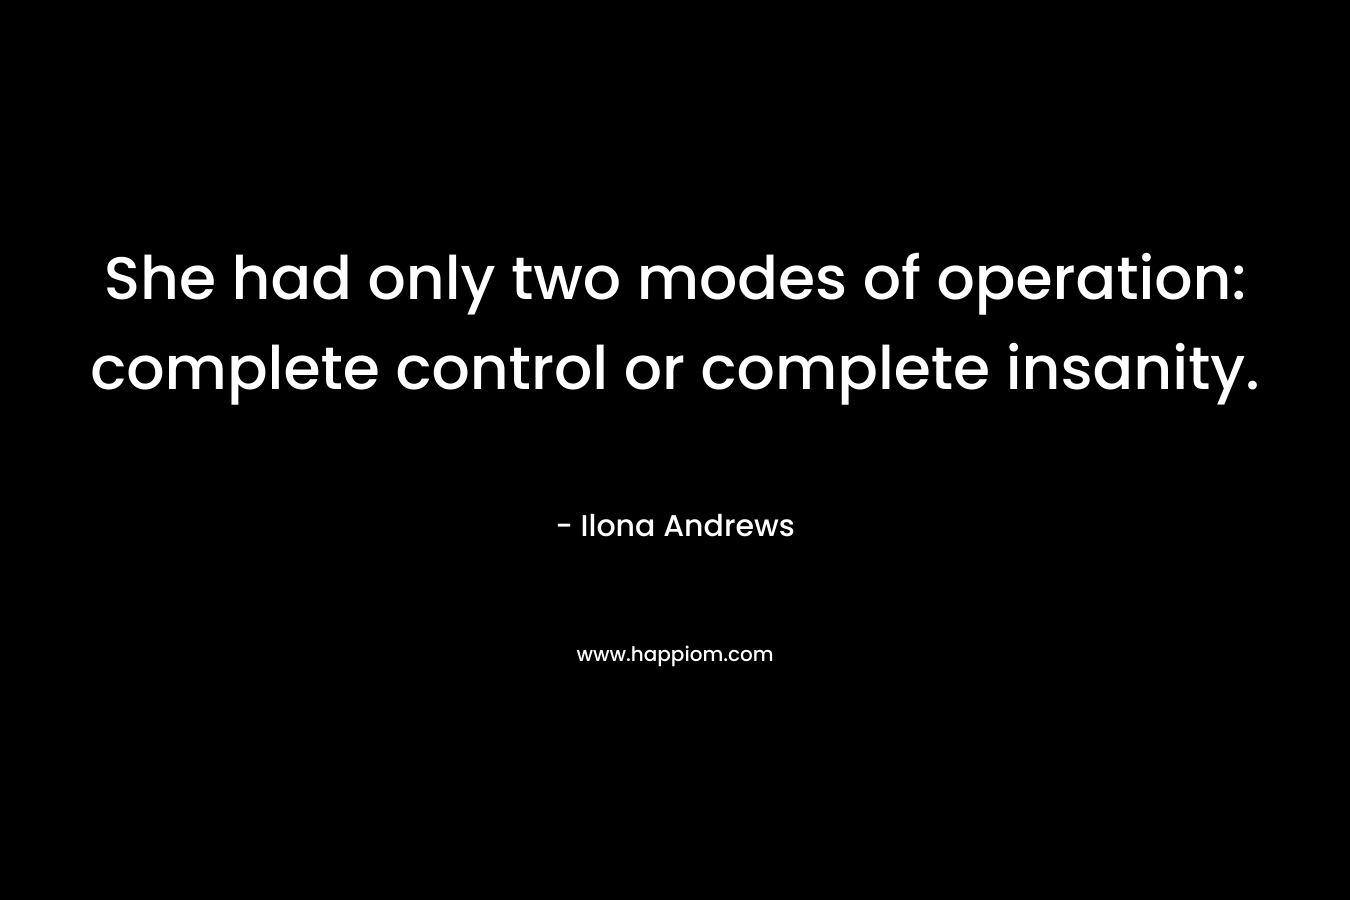 She had only two modes of operation: complete control or complete insanity.